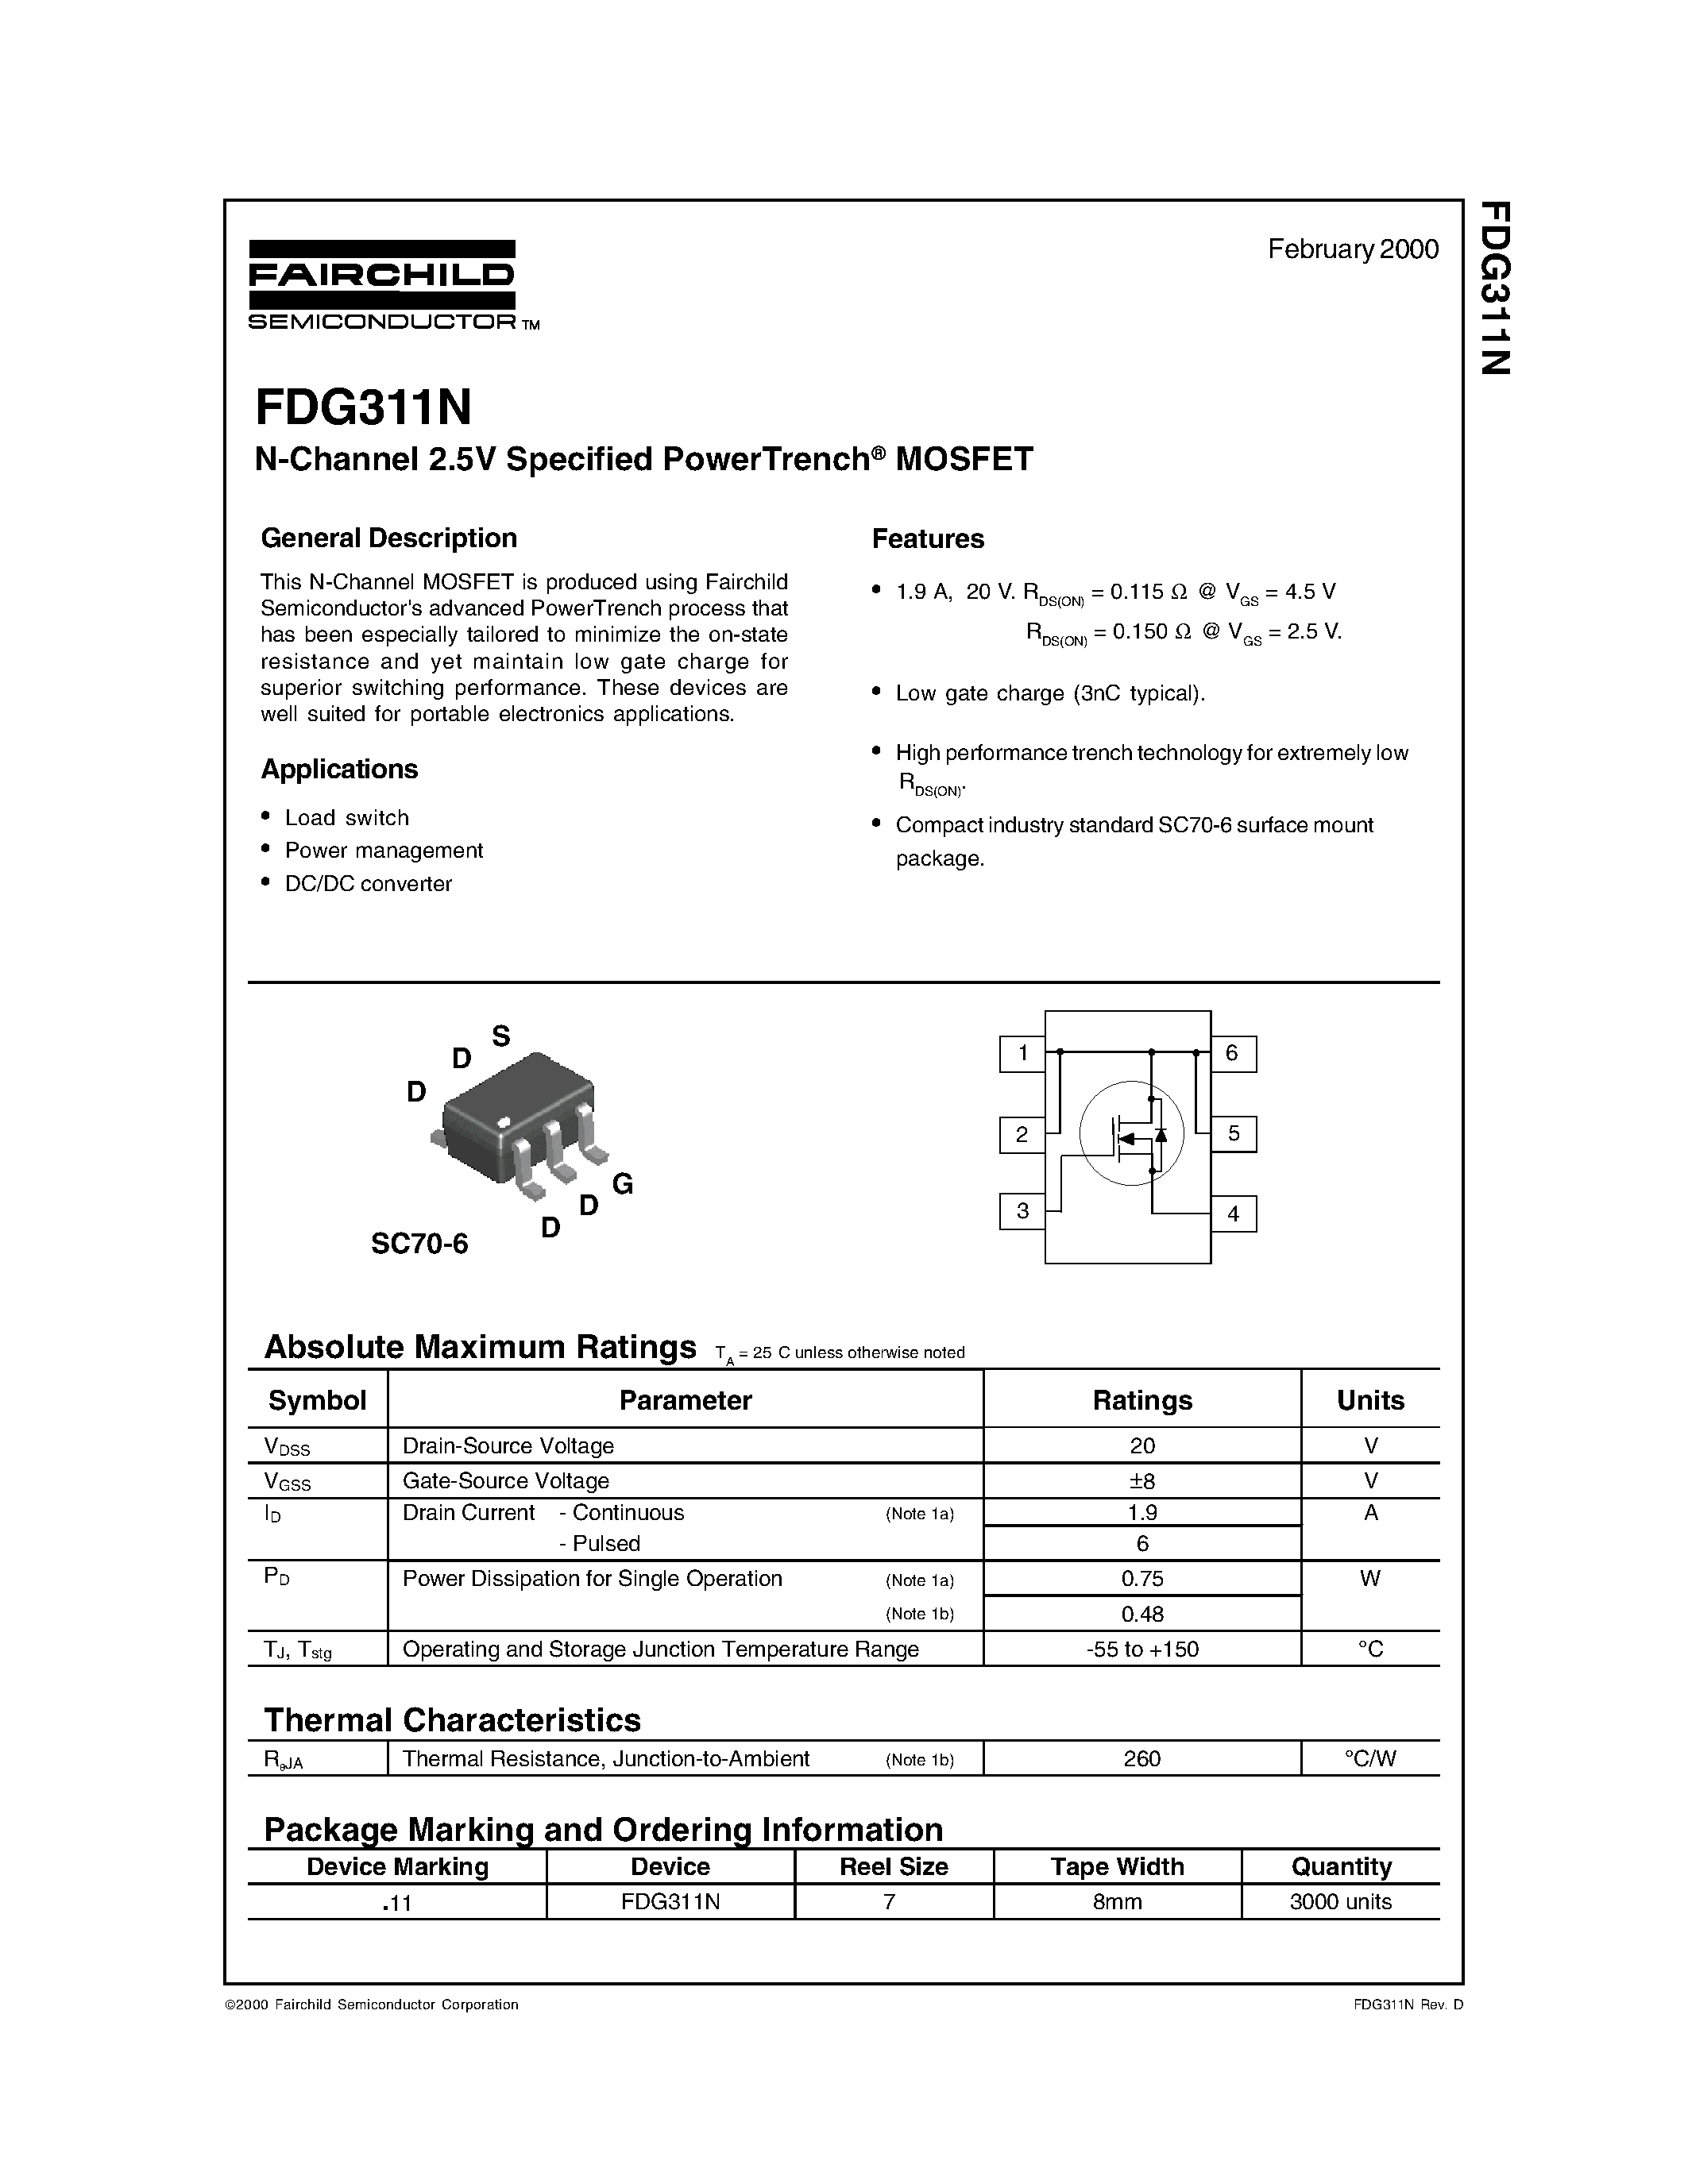 Datasheet FDG311N - N-Channel 2.5V Specified PowerTrench MOSFET page 1